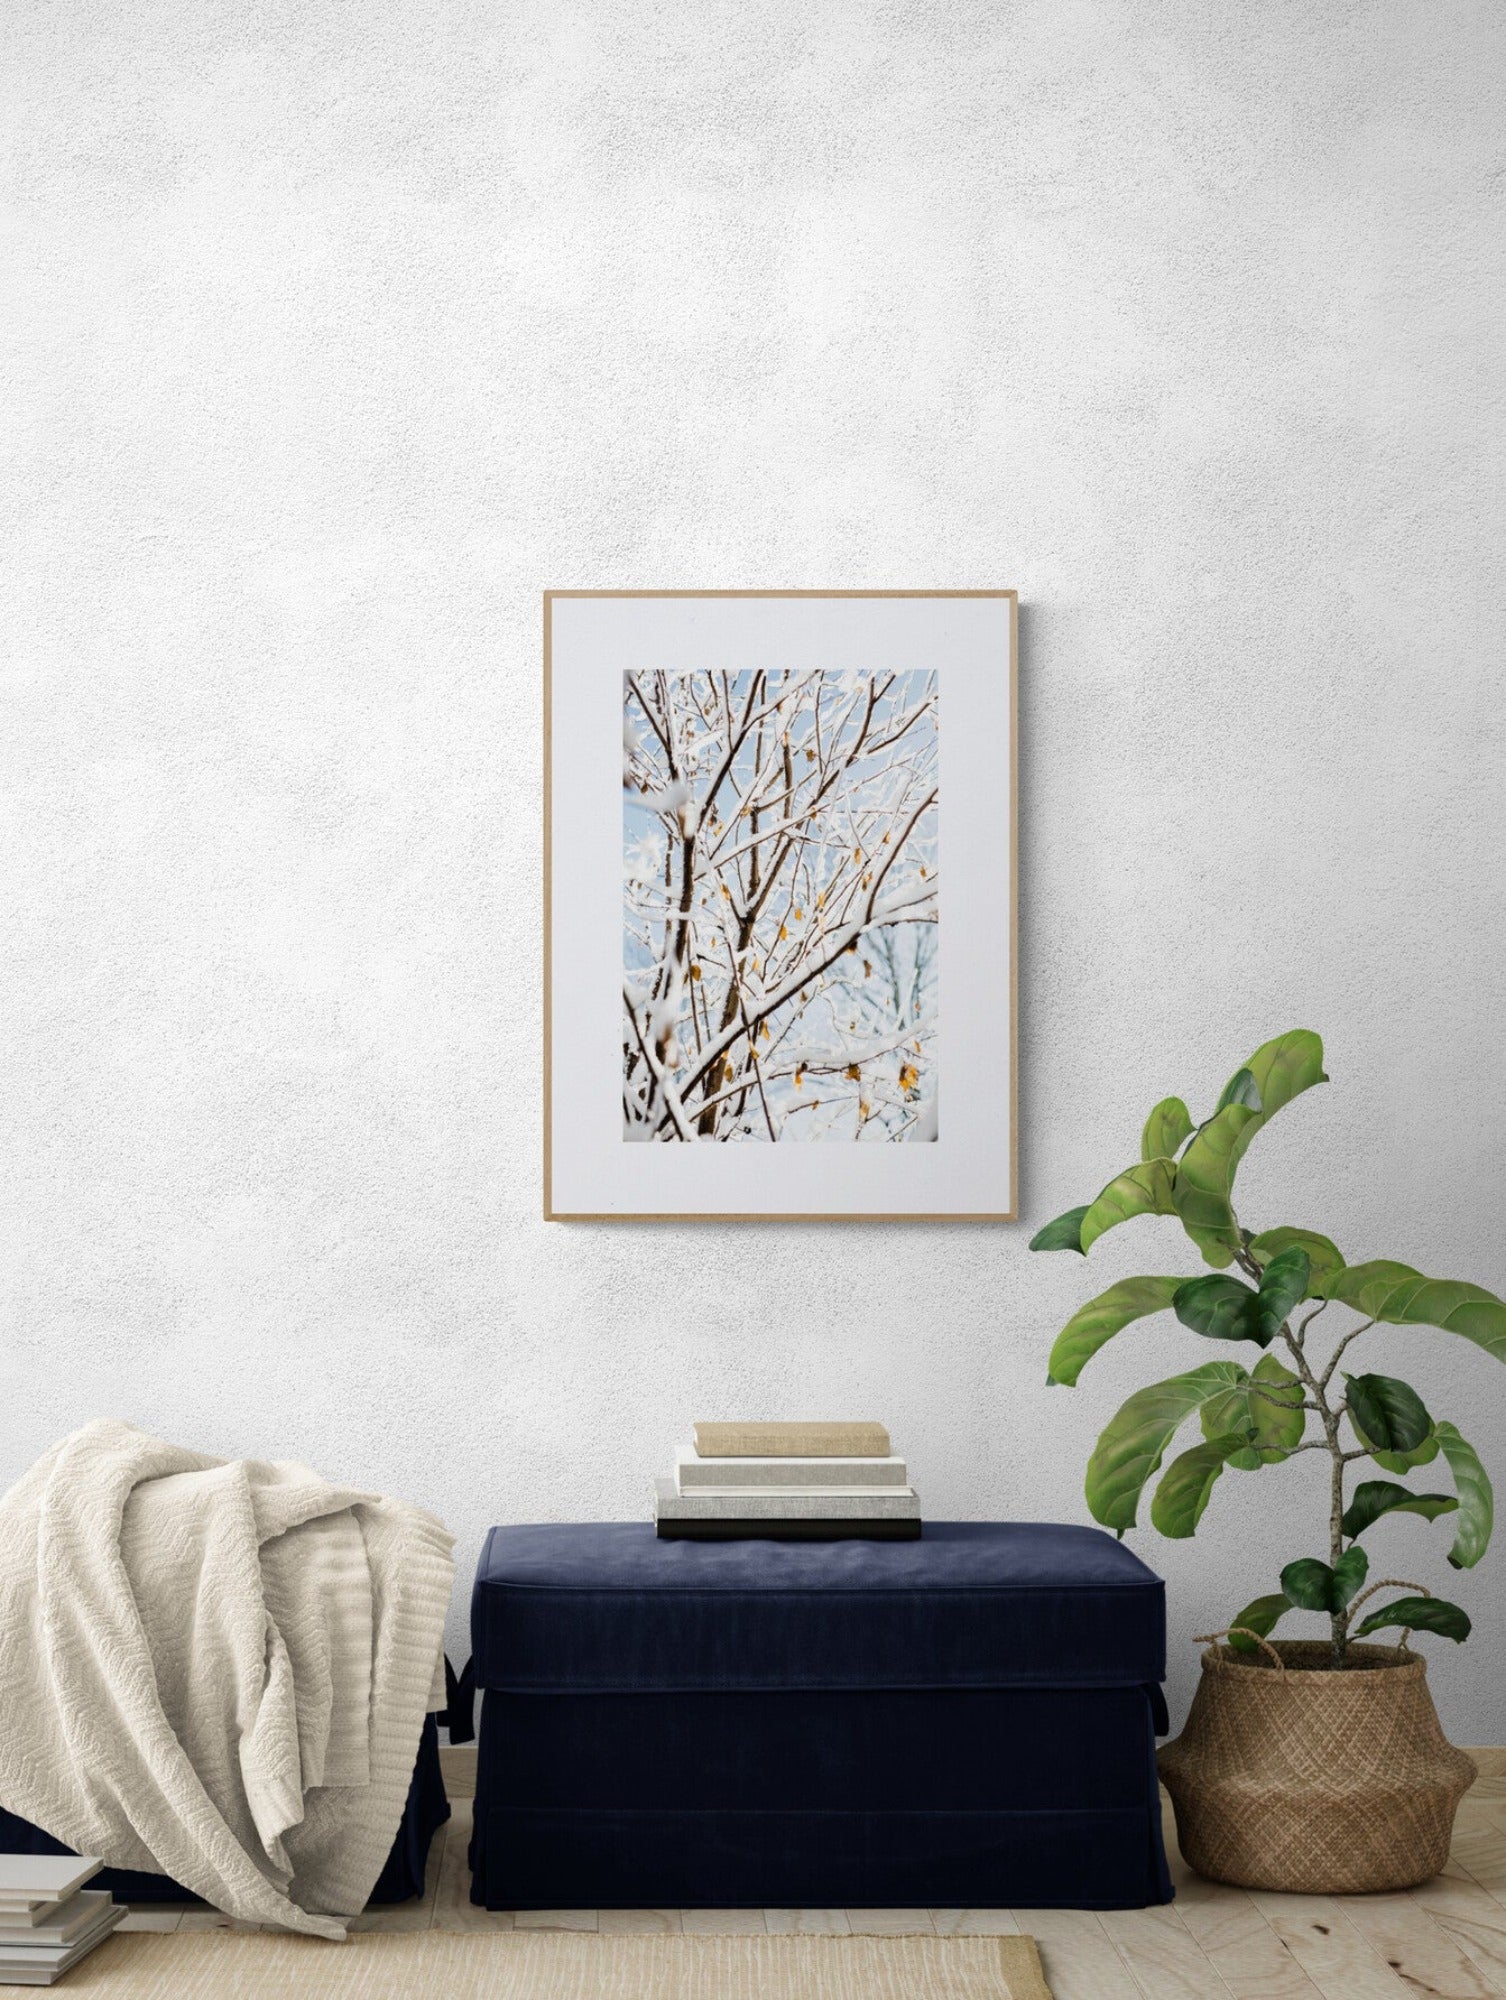 Photograph print of snow covered branches as entryway wall art